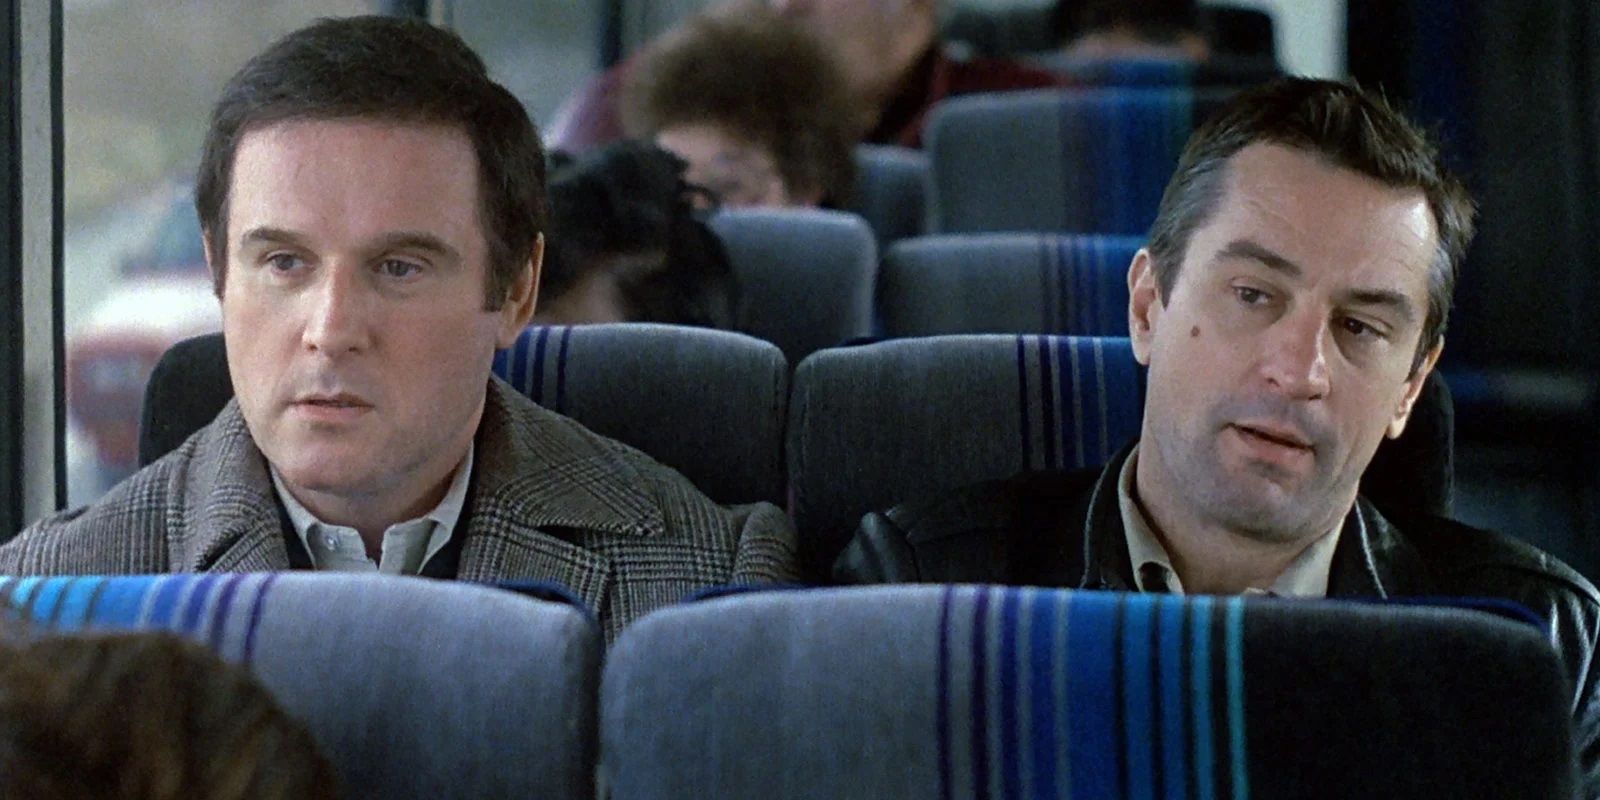 Robert De Niro and Charles Grodin sit on a bus in Midnight Run